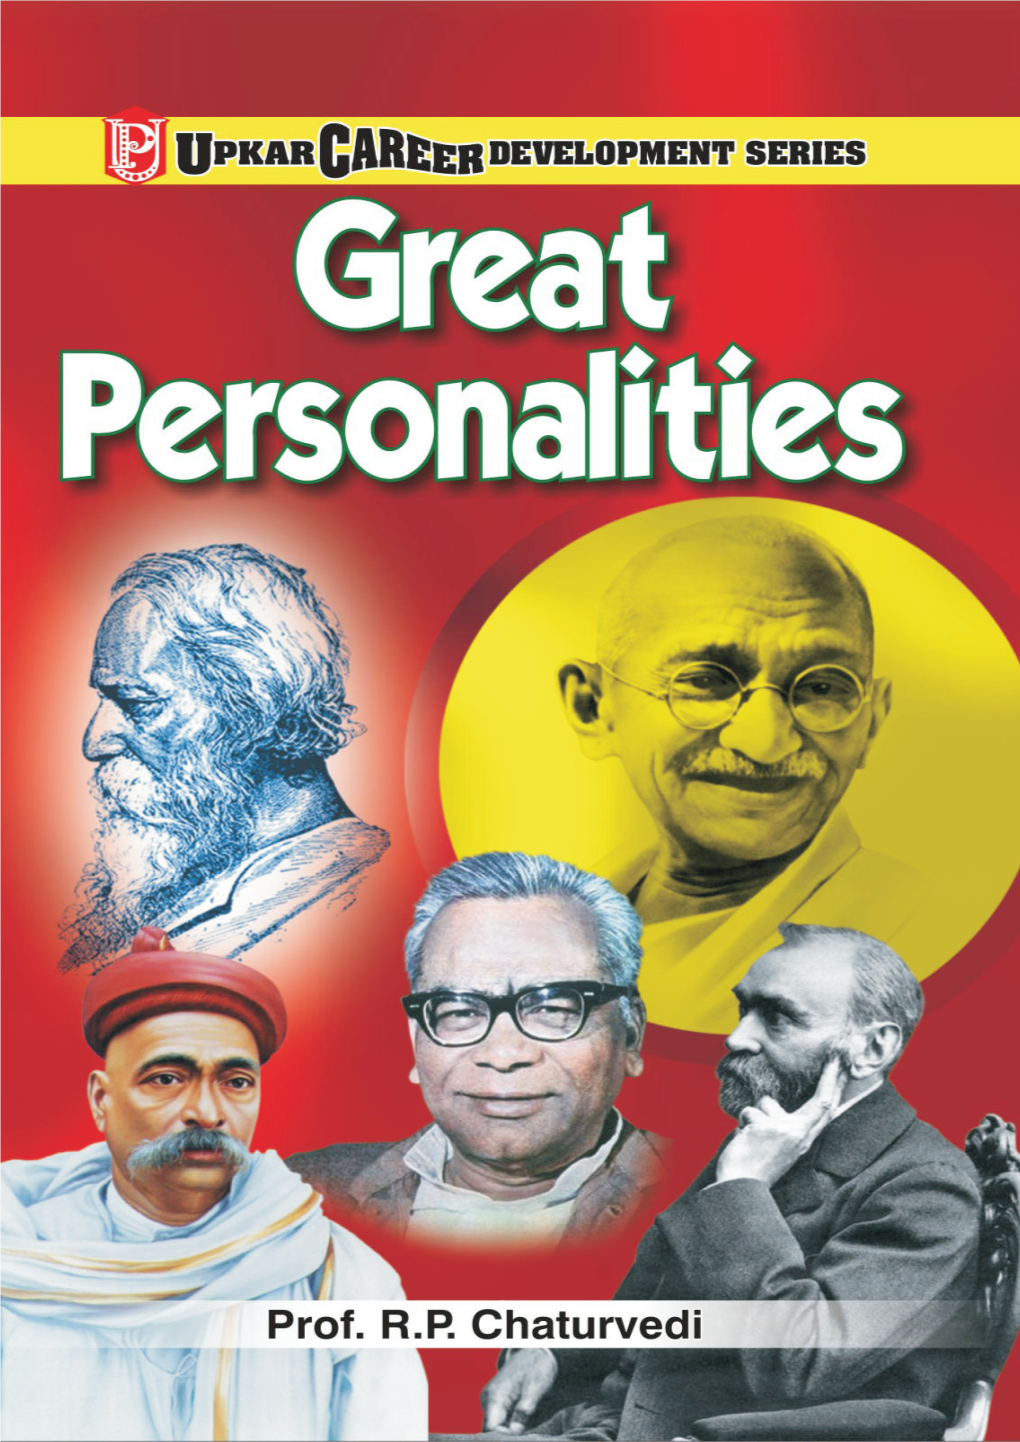 Great Personalities’ May Be Arranged